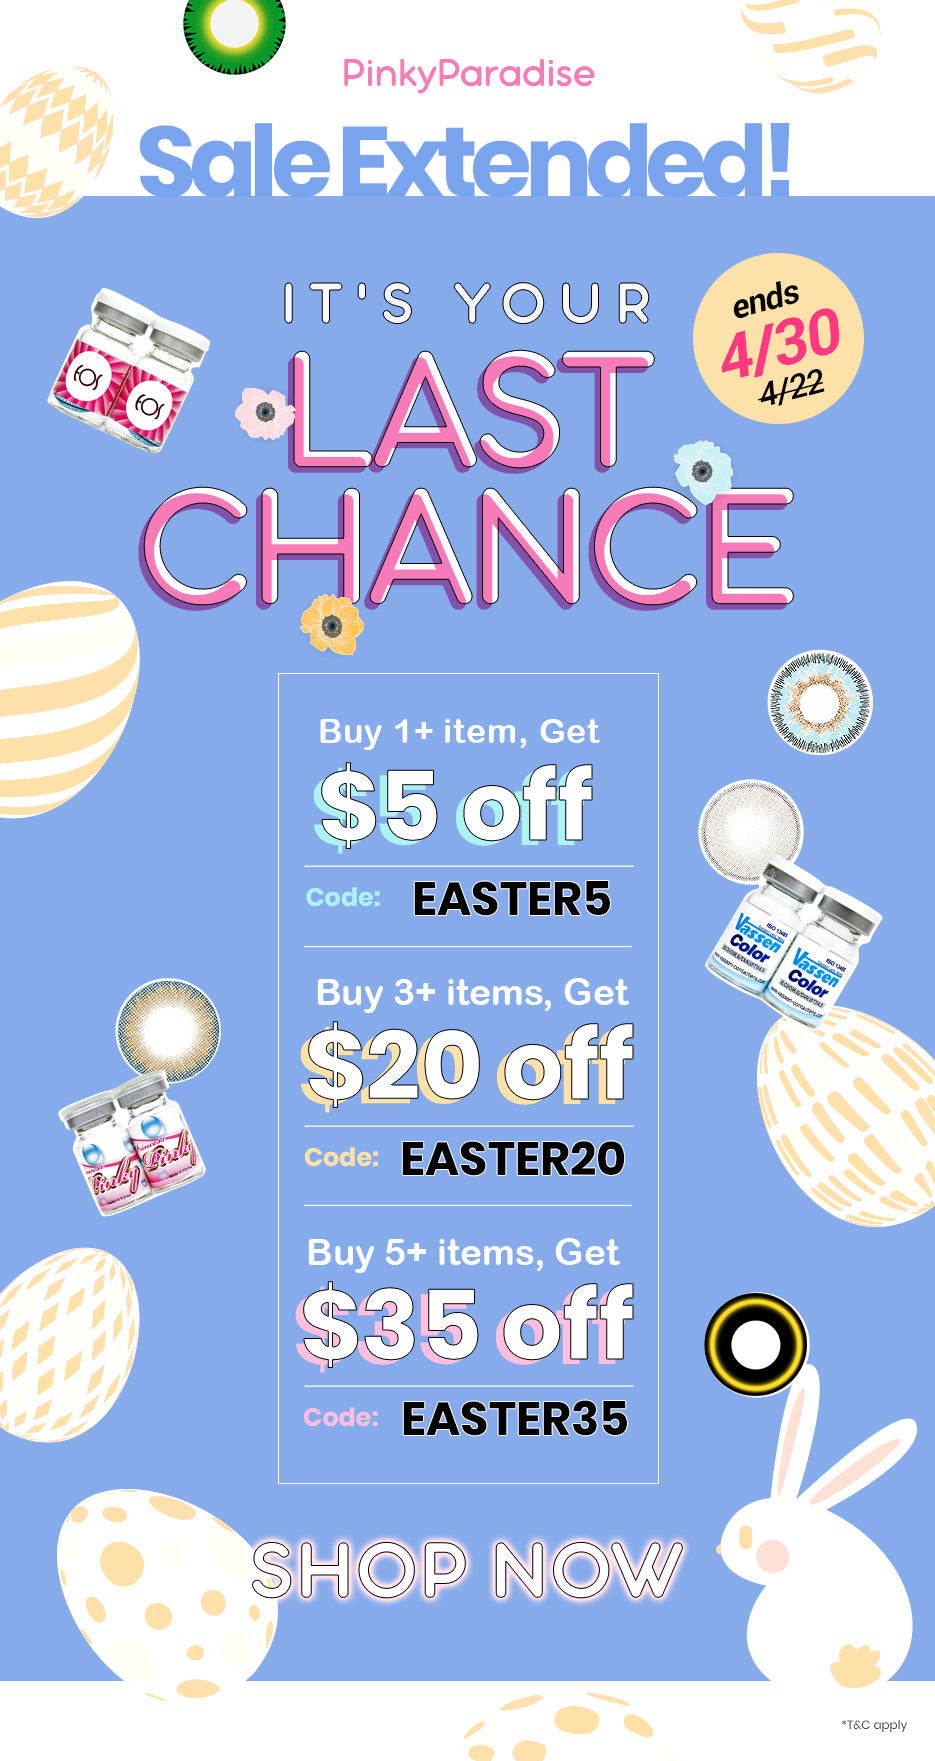 Easter Sales for circle lenses and colored contacts, up to $35 off. 